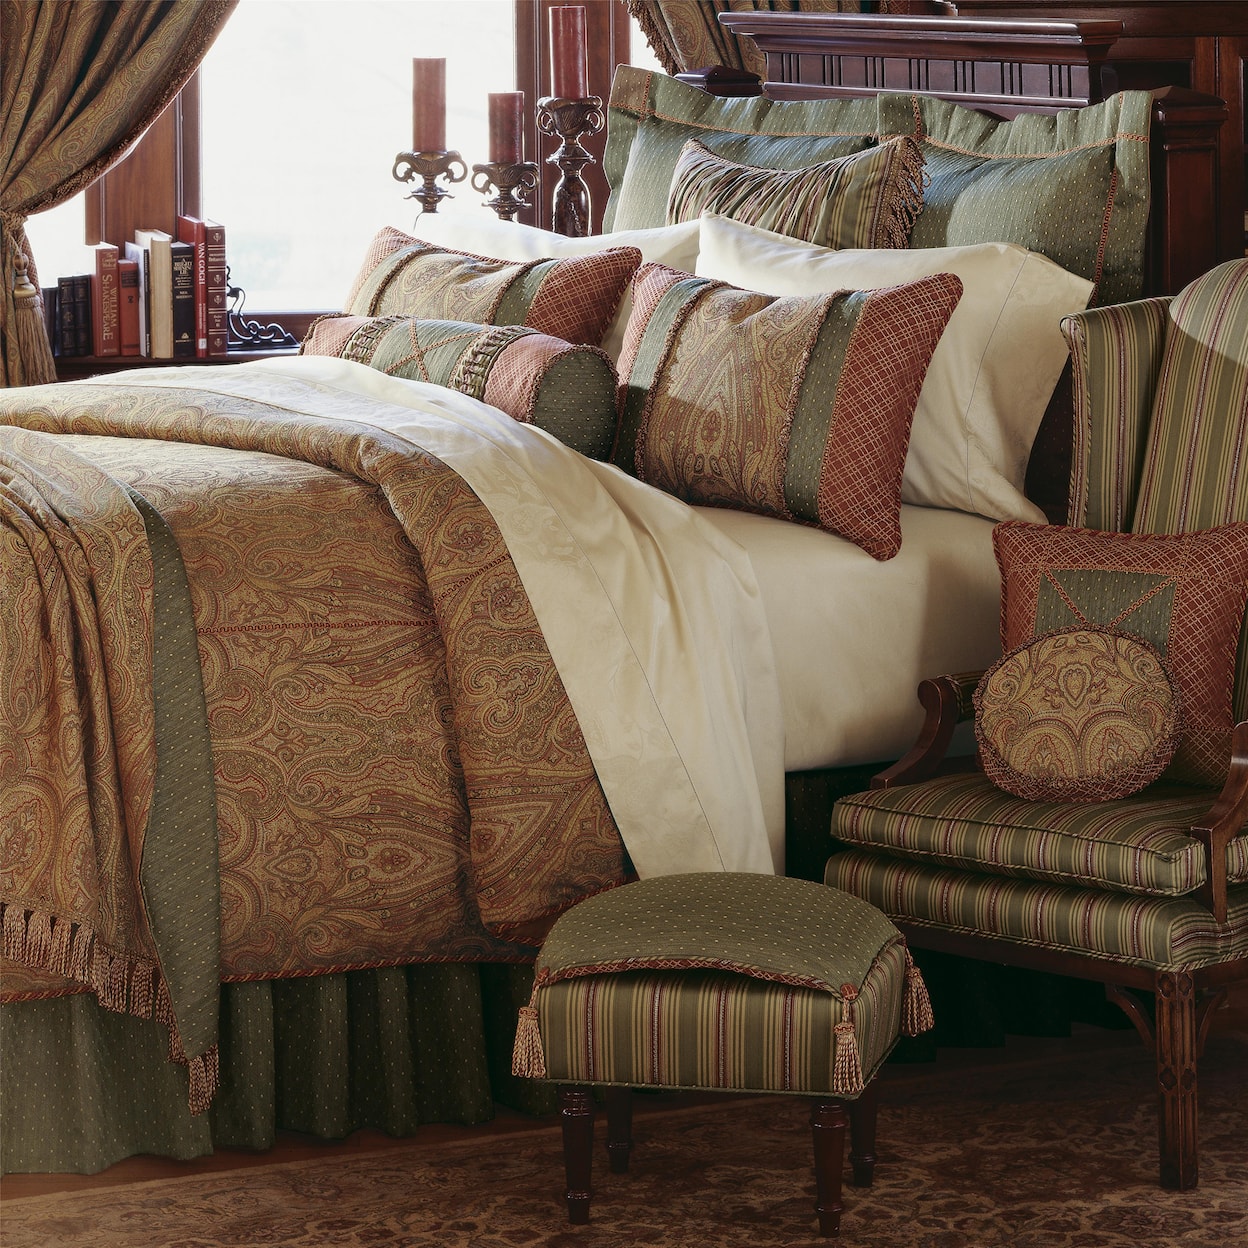 Eastern Accents Glenwood Twin Button-Tufted Comforter